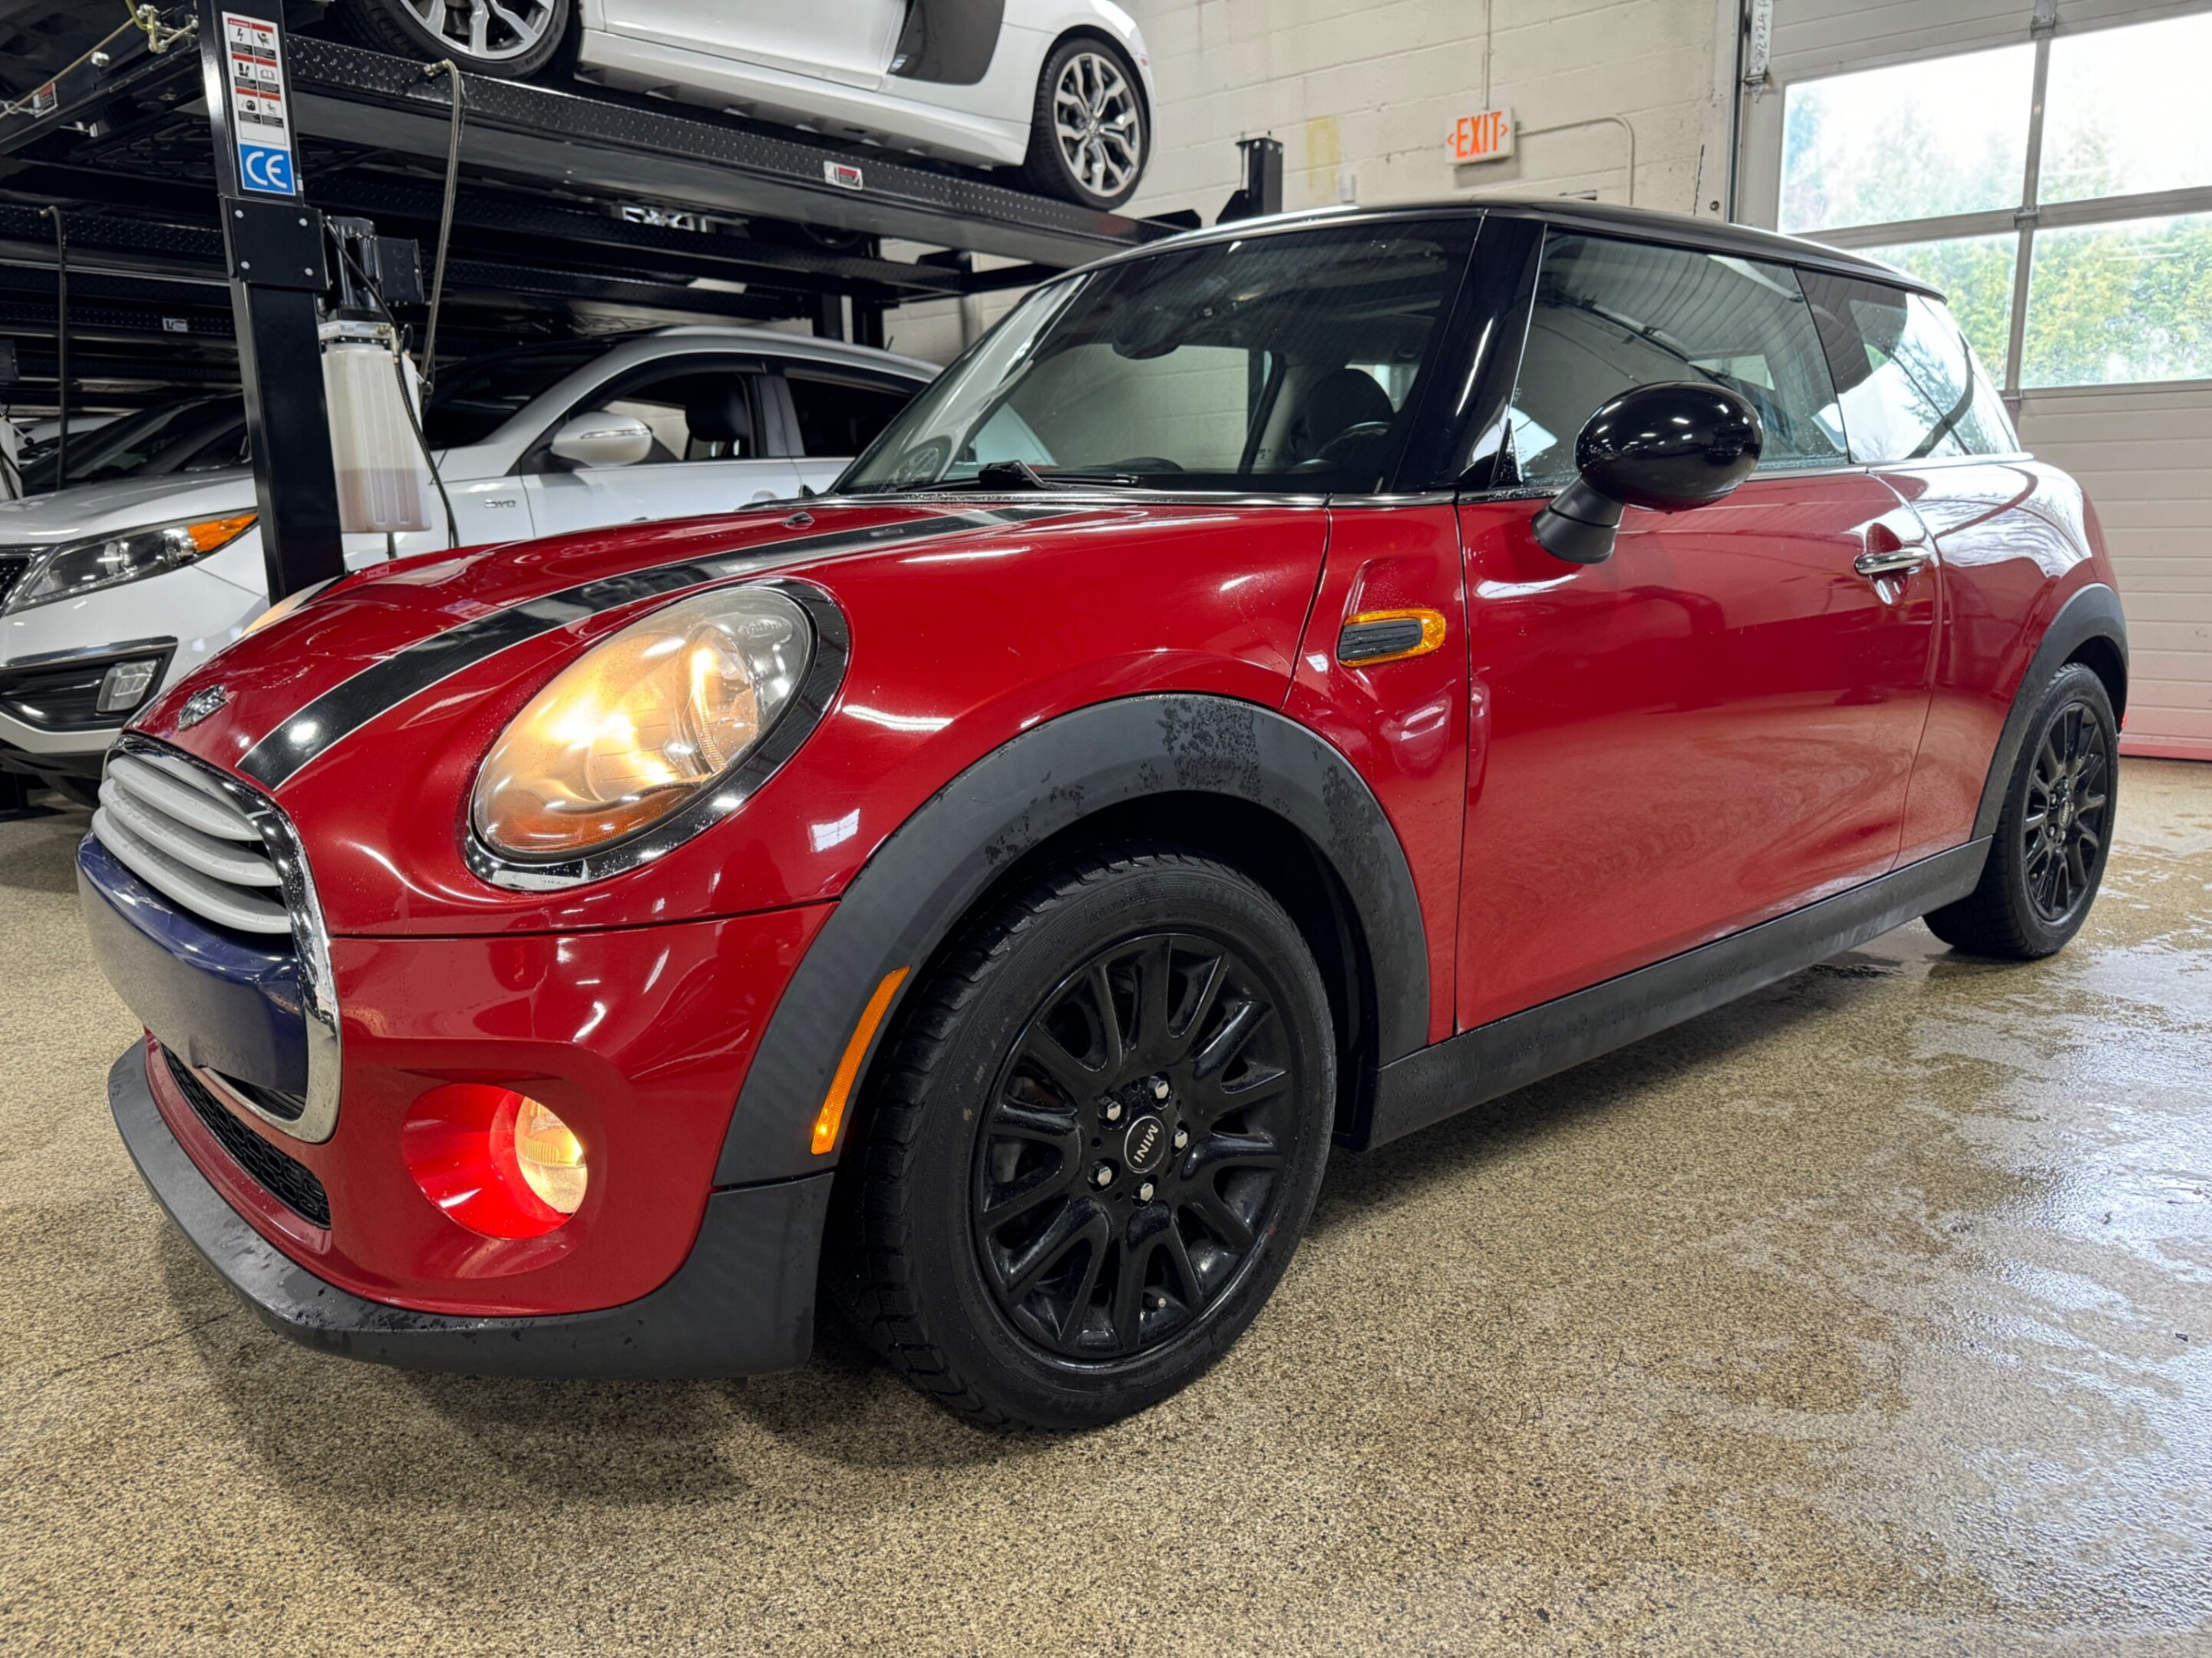 2015 MINI Cooper Hardtop 3dr HB - BLUETOOTH - HEATED SEATS - PANORAMIC ROOF